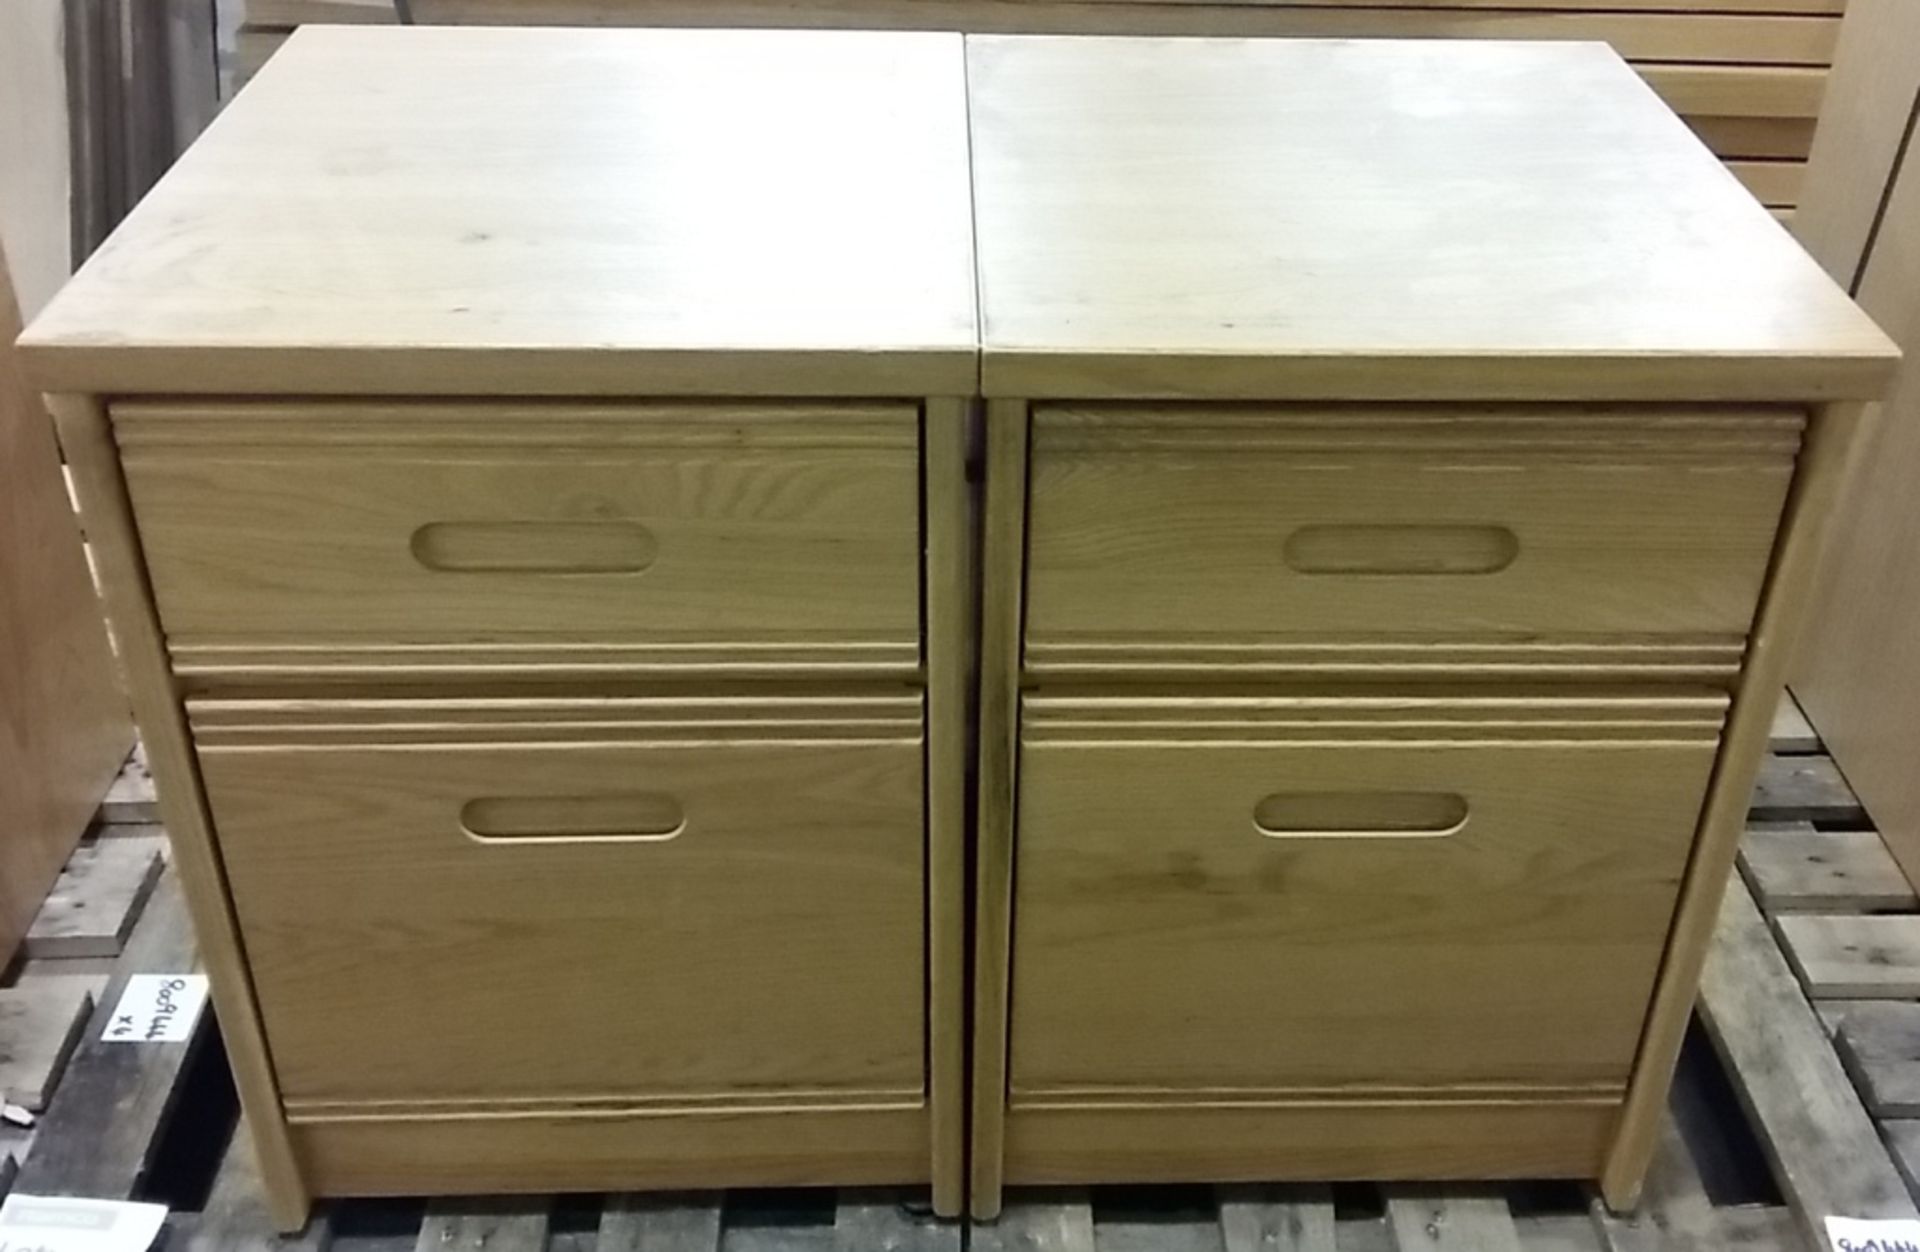 2x 2 drawer wooden cabinets